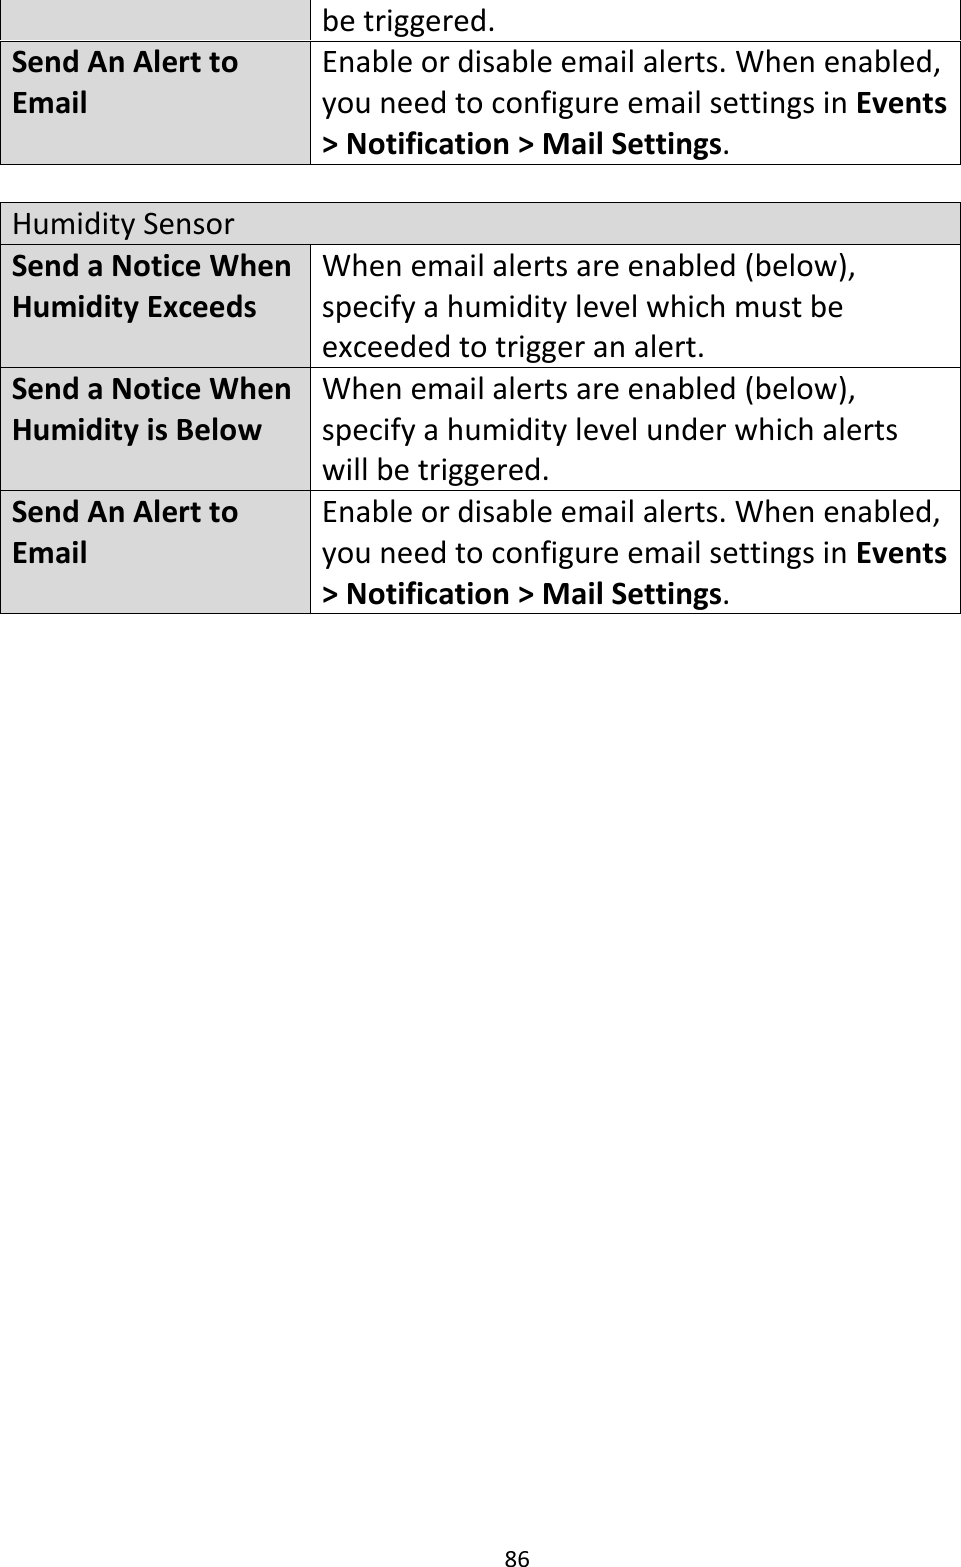 86  be triggered. Send An Alert to Email Enable or disable email alerts. When enabled, you need to configure email settings in Events &gt; Notification &gt; Mail Settings.  Humidity Sensor Send a Notice When Humidity Exceeds When email alerts are enabled (below), specify a humidity level which must be exceeded to trigger an alert. Send a Notice When Humidity is Below When email alerts are enabled (below), specify a humidity level under which alerts will be triggered. Send An Alert to Email Enable or disable email alerts. When enabled, you need to configure email settings in Events &gt; Notification &gt; Mail Settings.  